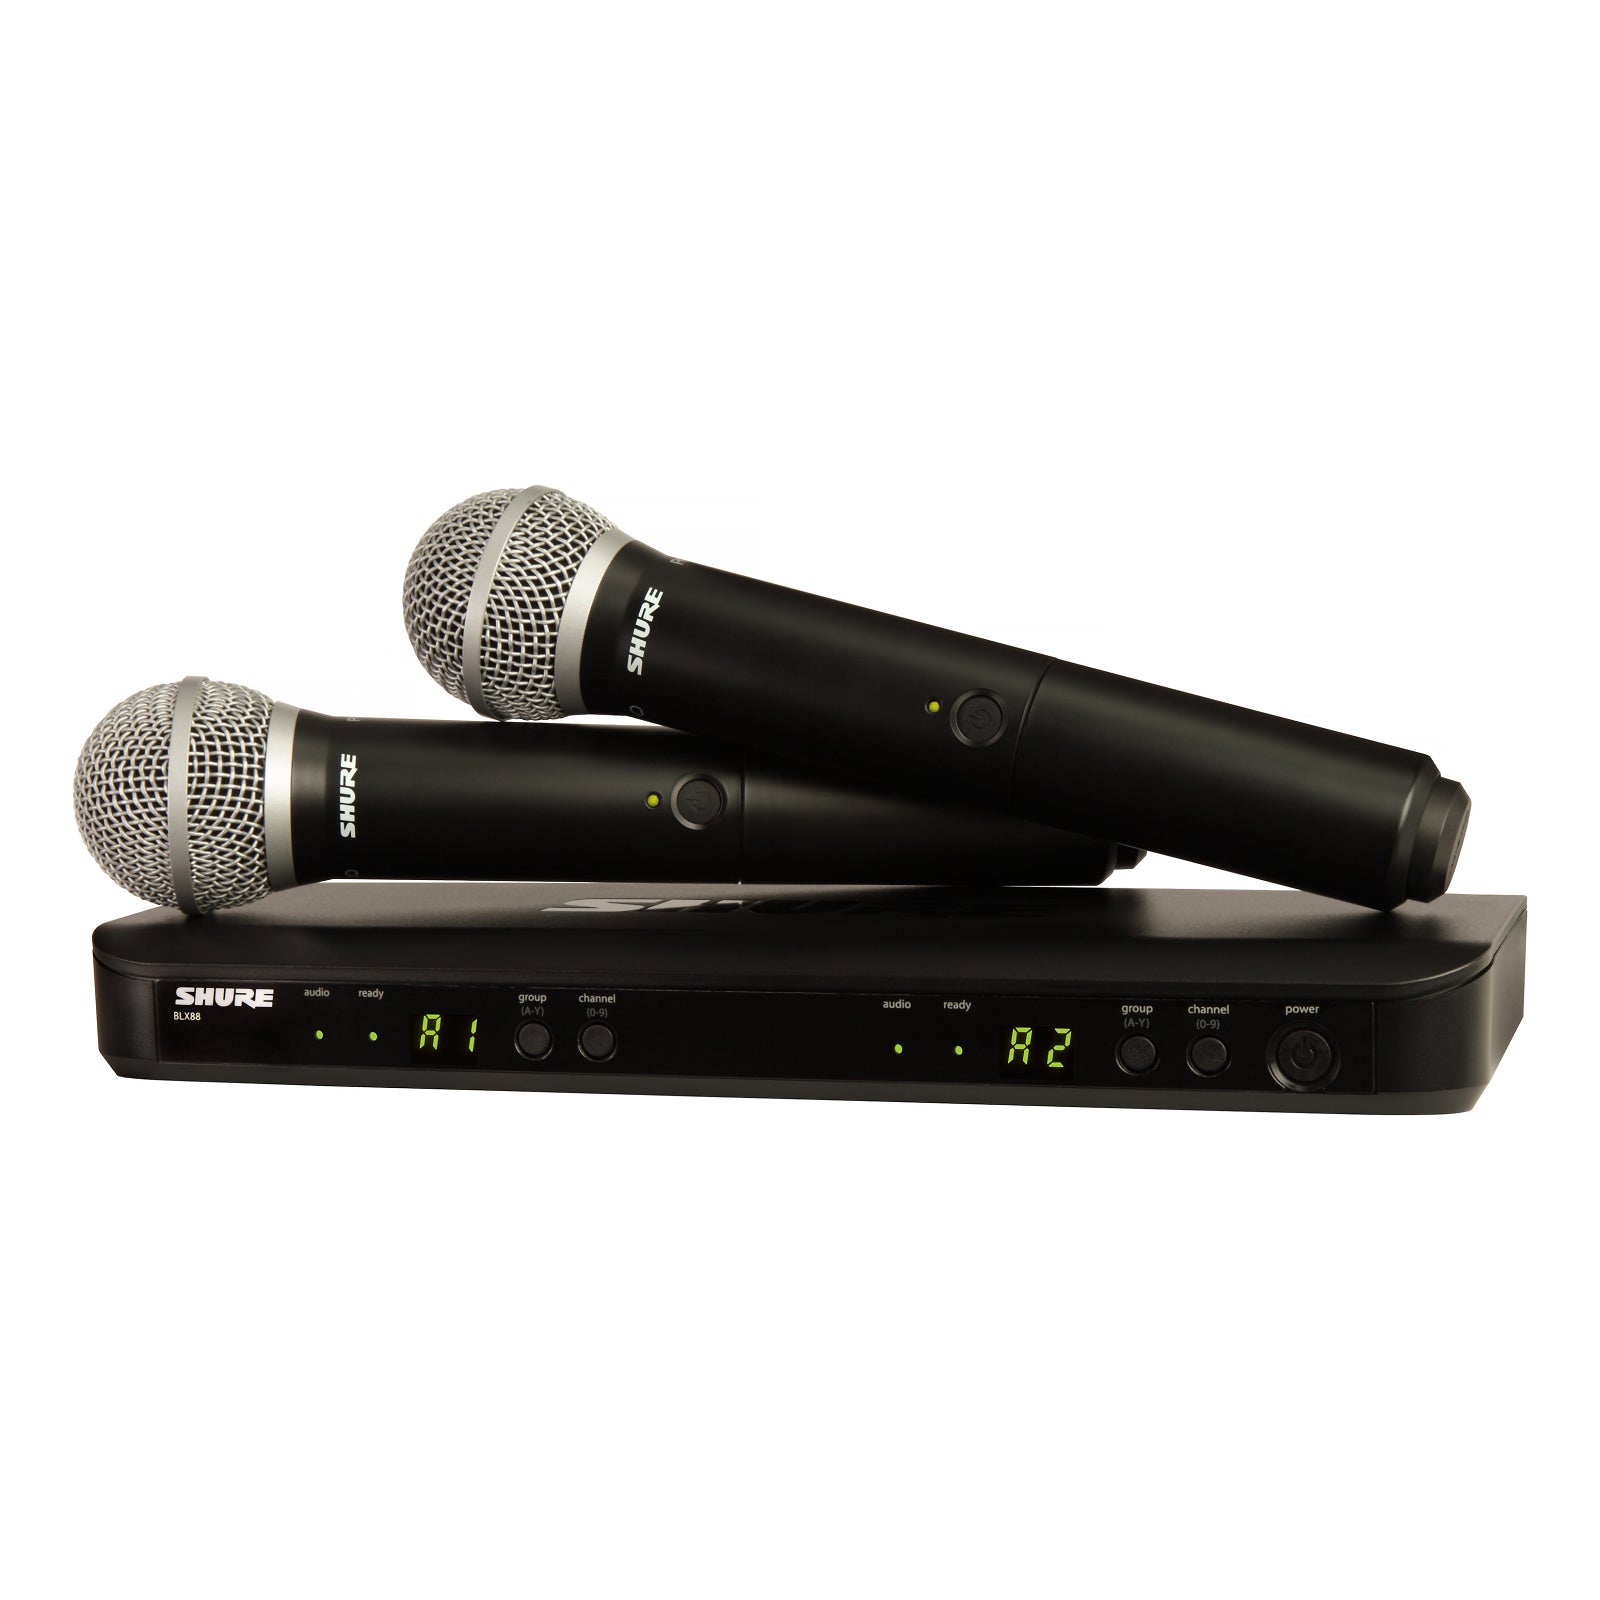 Shure BLX288/PG58 Dual Handheld Wireless PG58 Microphone System, Band H9 (512-542 MHz)